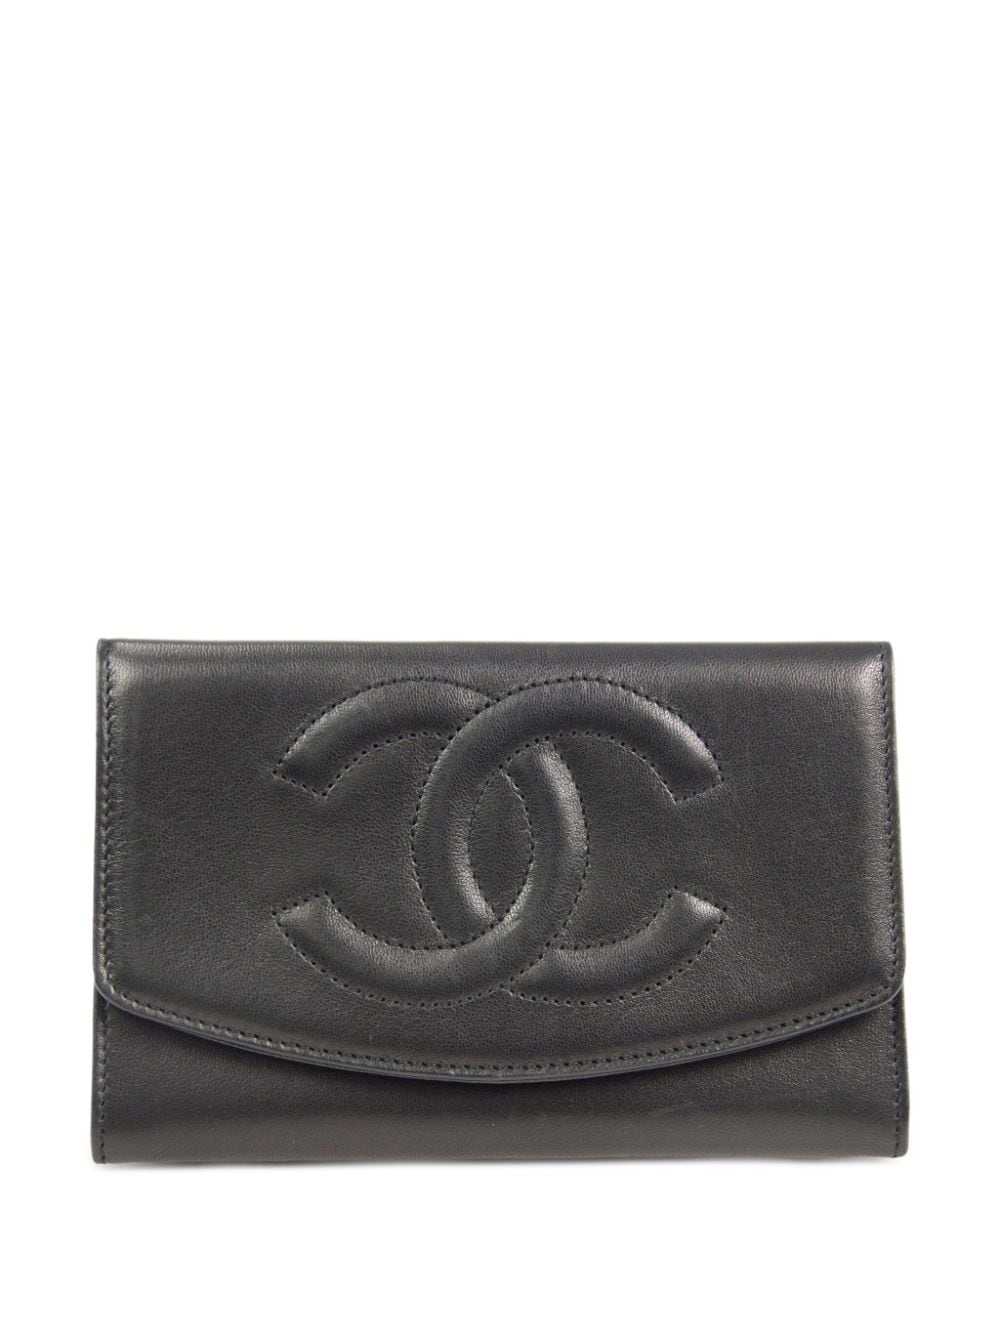 CHANEL Pre-Owned 1997 CC leather wallet - Black - image 1